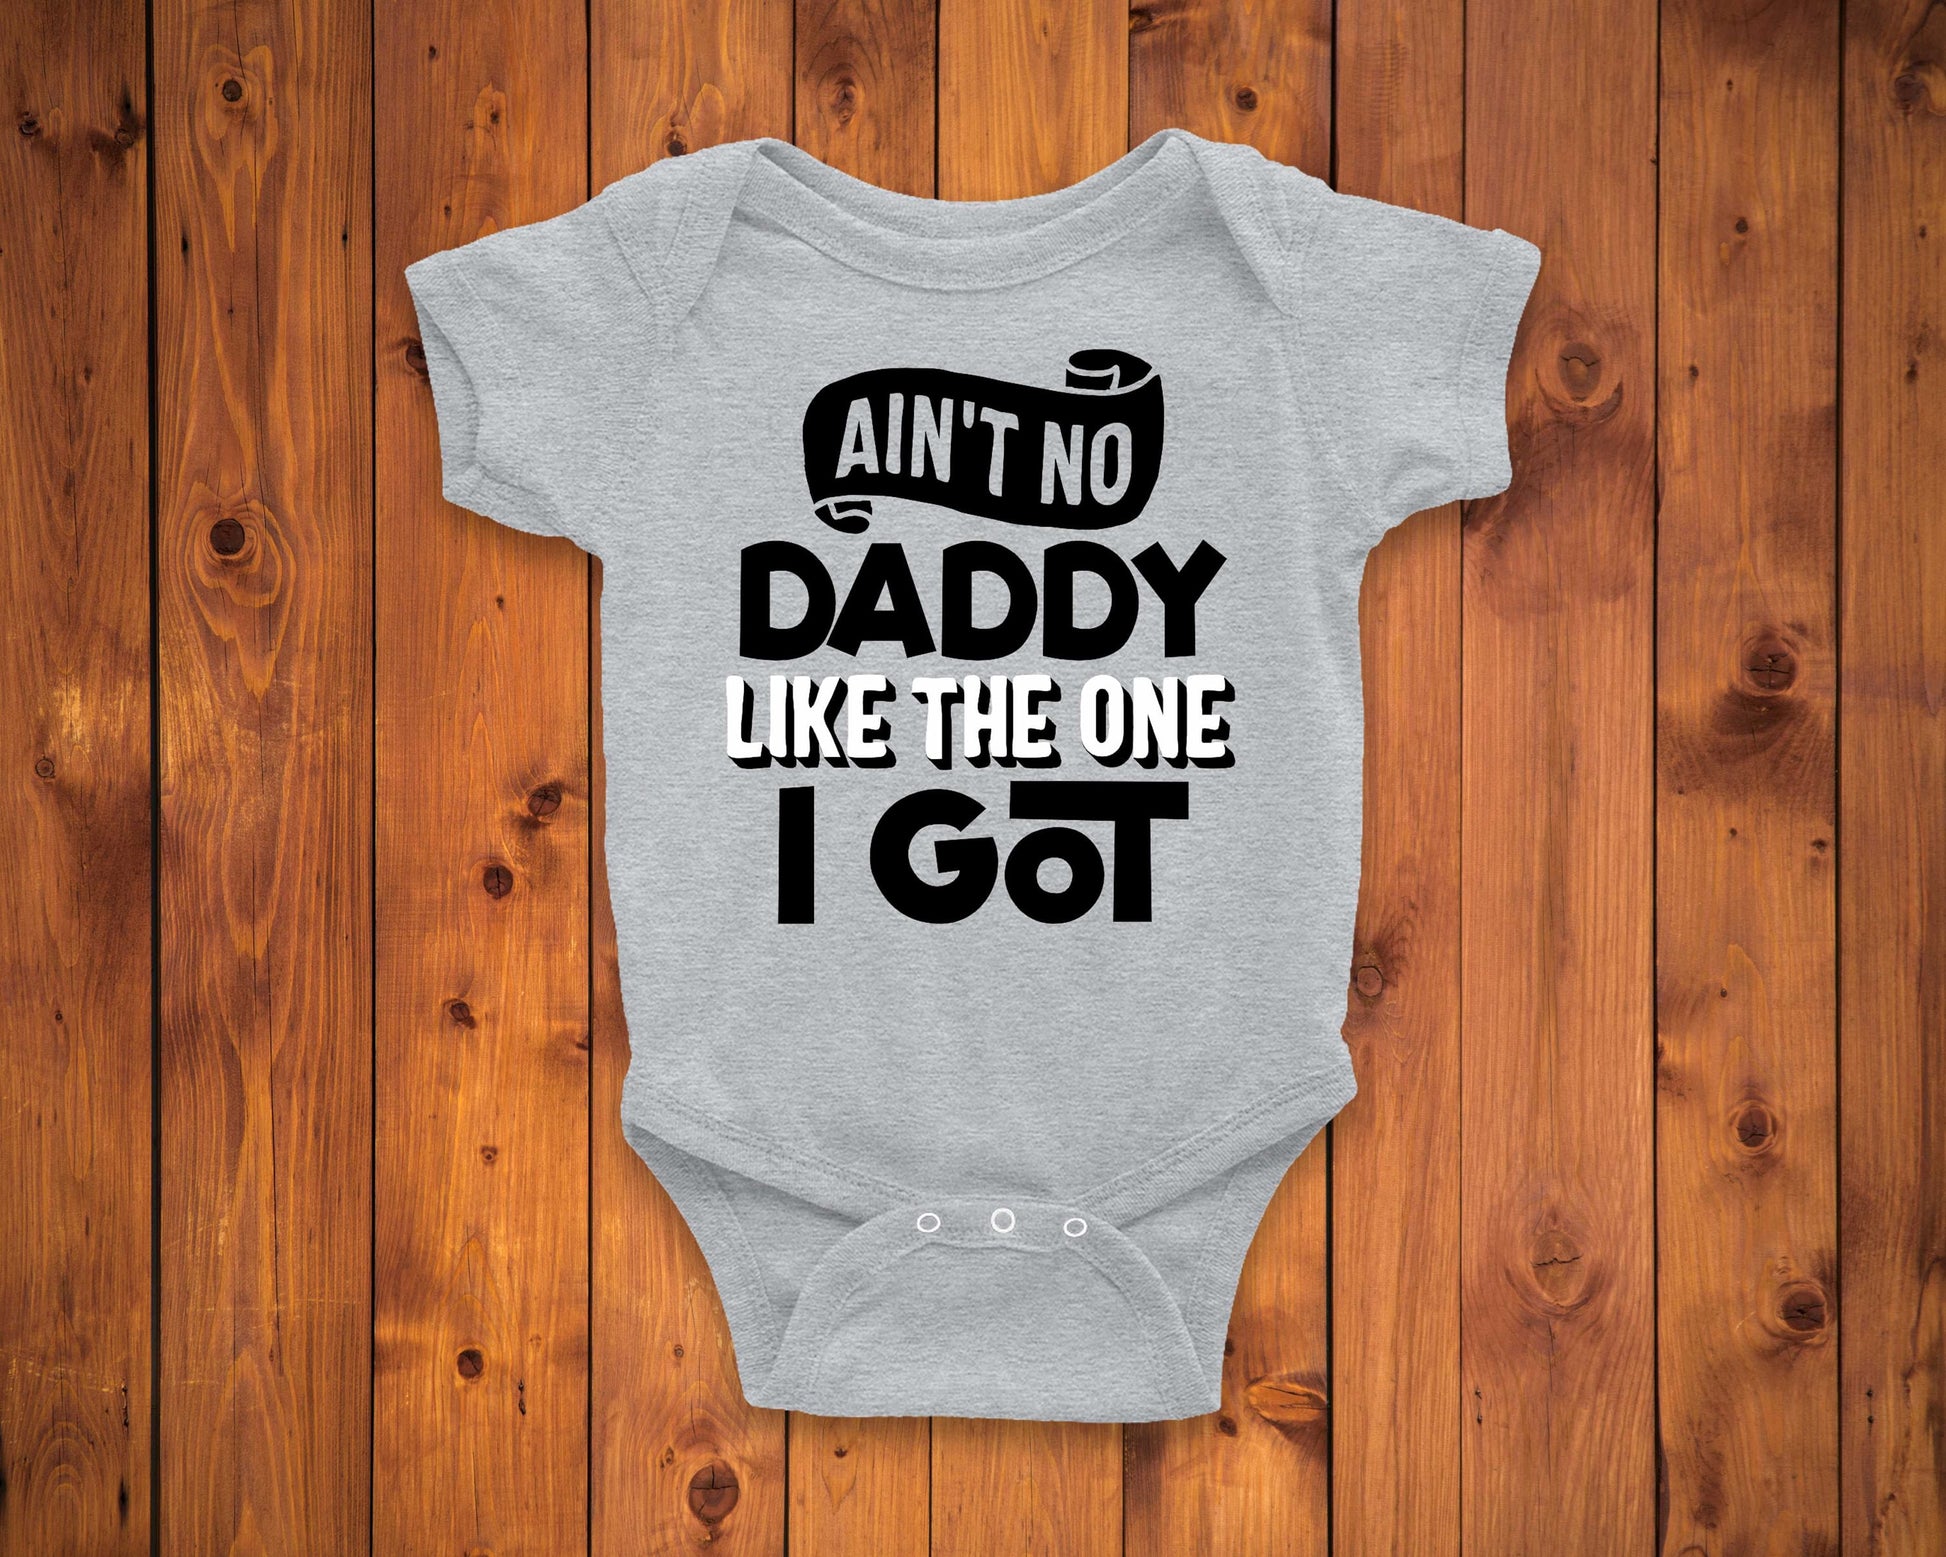 Ain't No Daddy Like the One I Got Infant or Kids Shirt or Bodysuit - daddy daughter shirt - daddy gift - father's day shirt - best dad ever